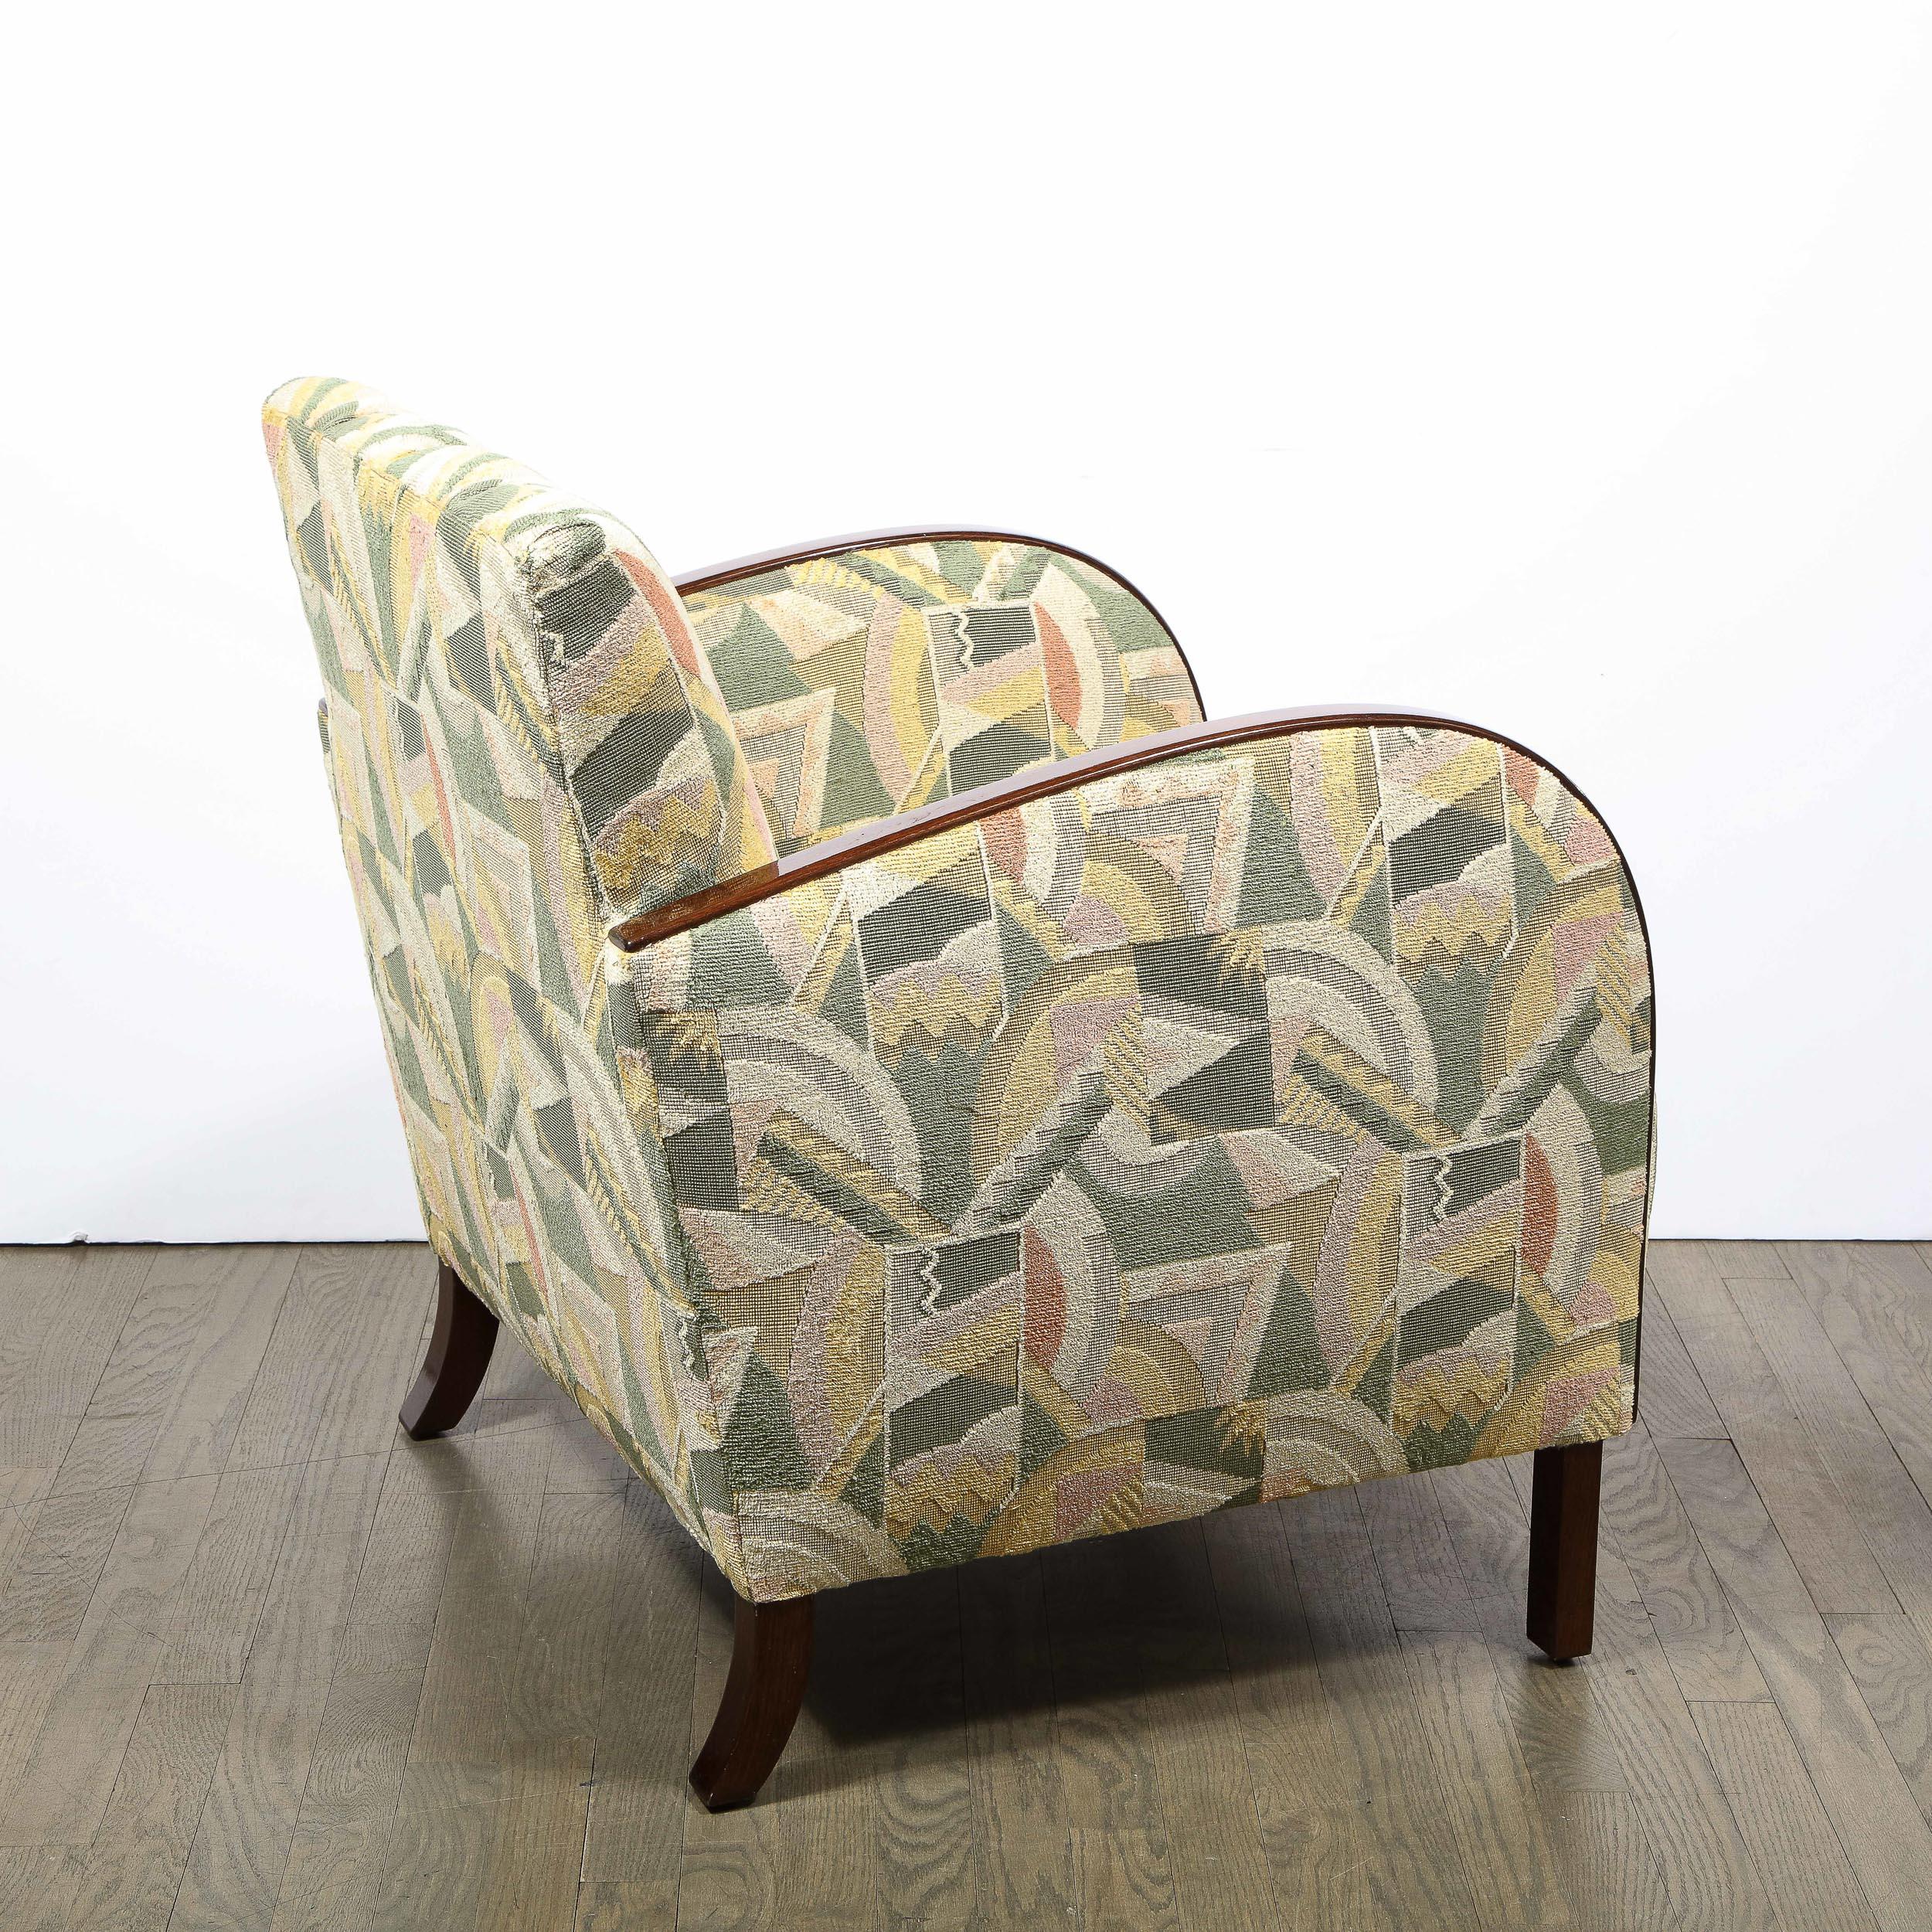 Pair of Art Deco Streamlined Walnut Club Chairs in Cubist Clarence House Fabric For Sale 4